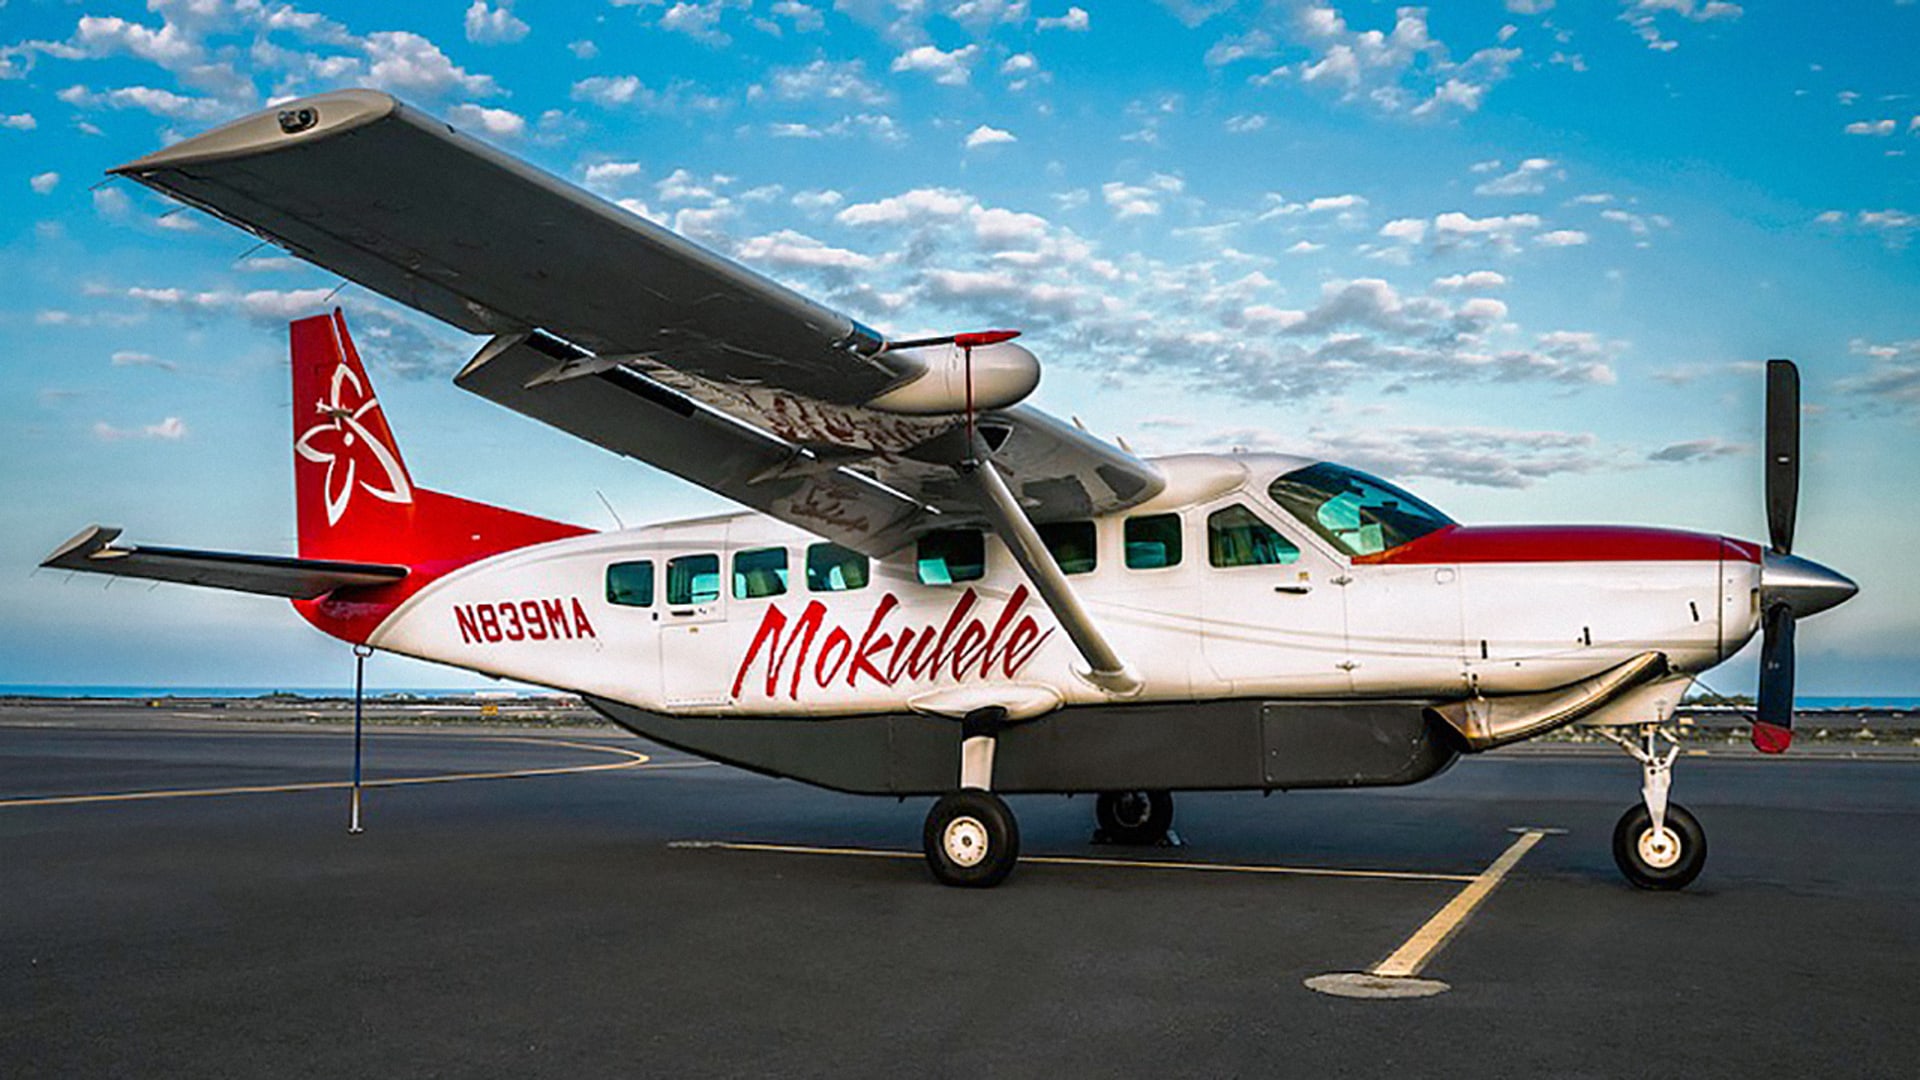 This company has found a way to retrofit planes so they fly with electric power